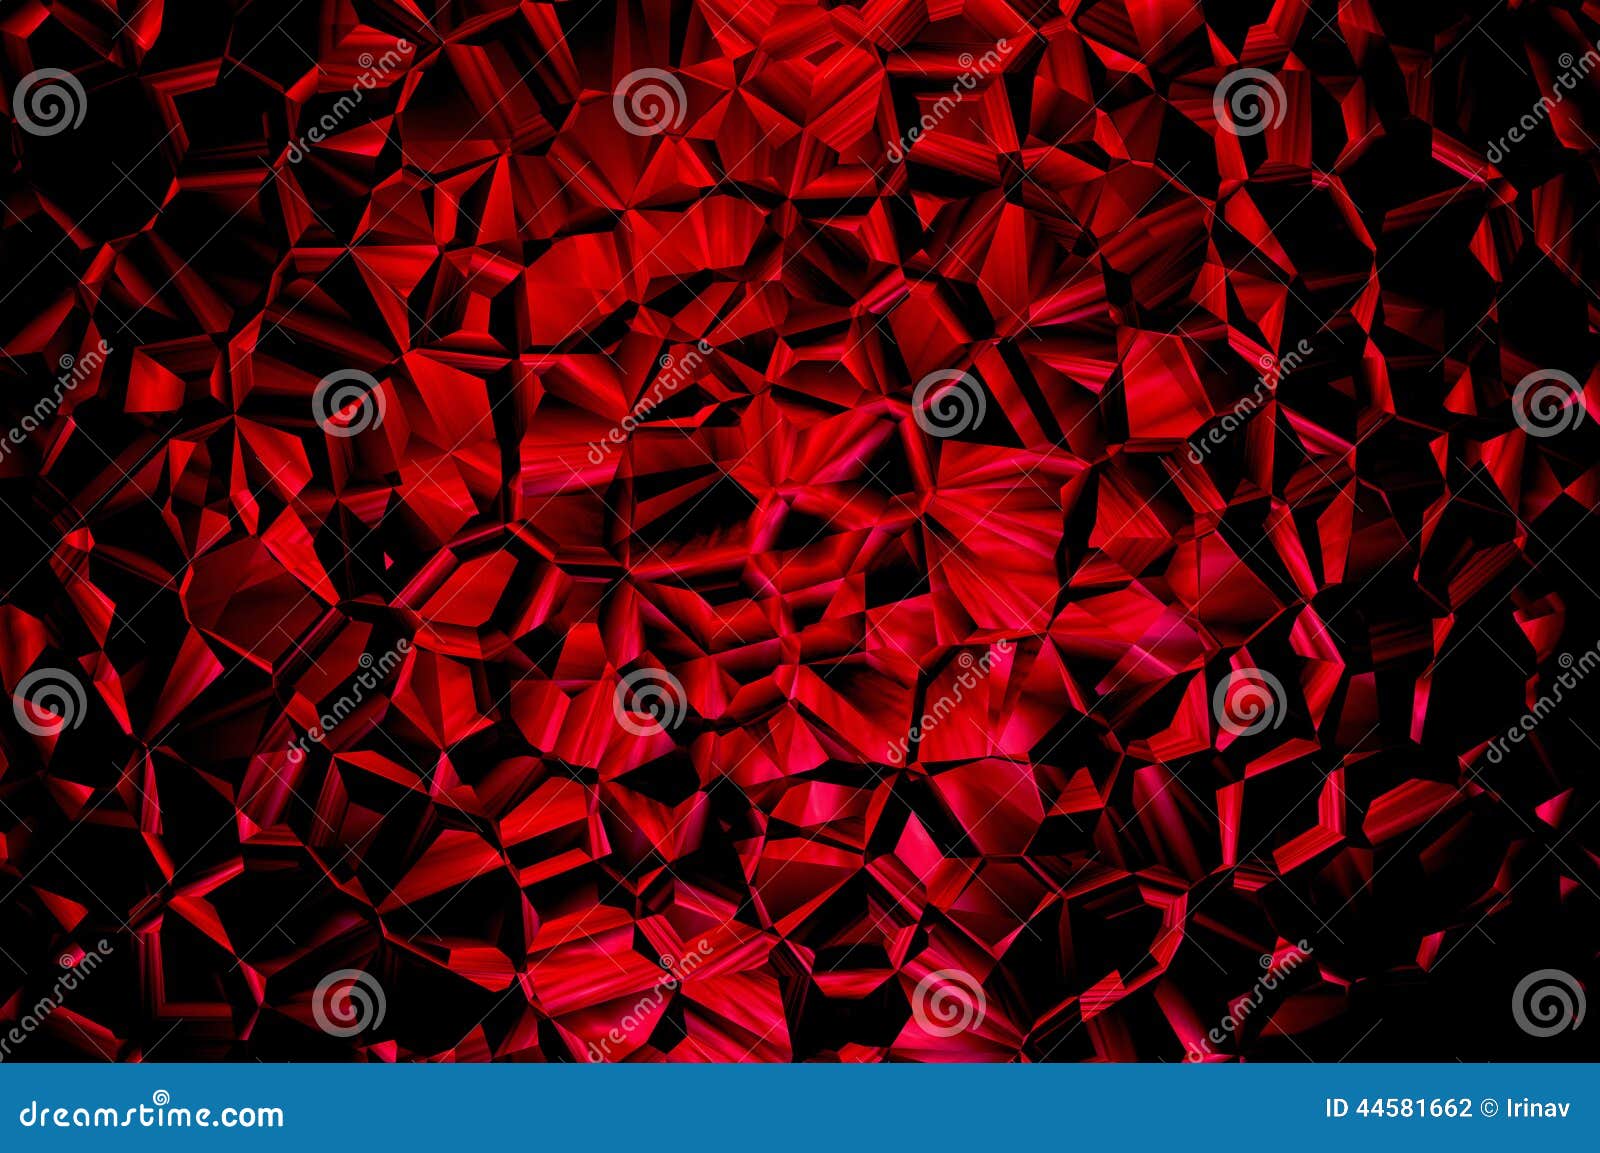 Abstract Red Black Background Stock Illustration - Illustration of curves,  mixing: 44581662